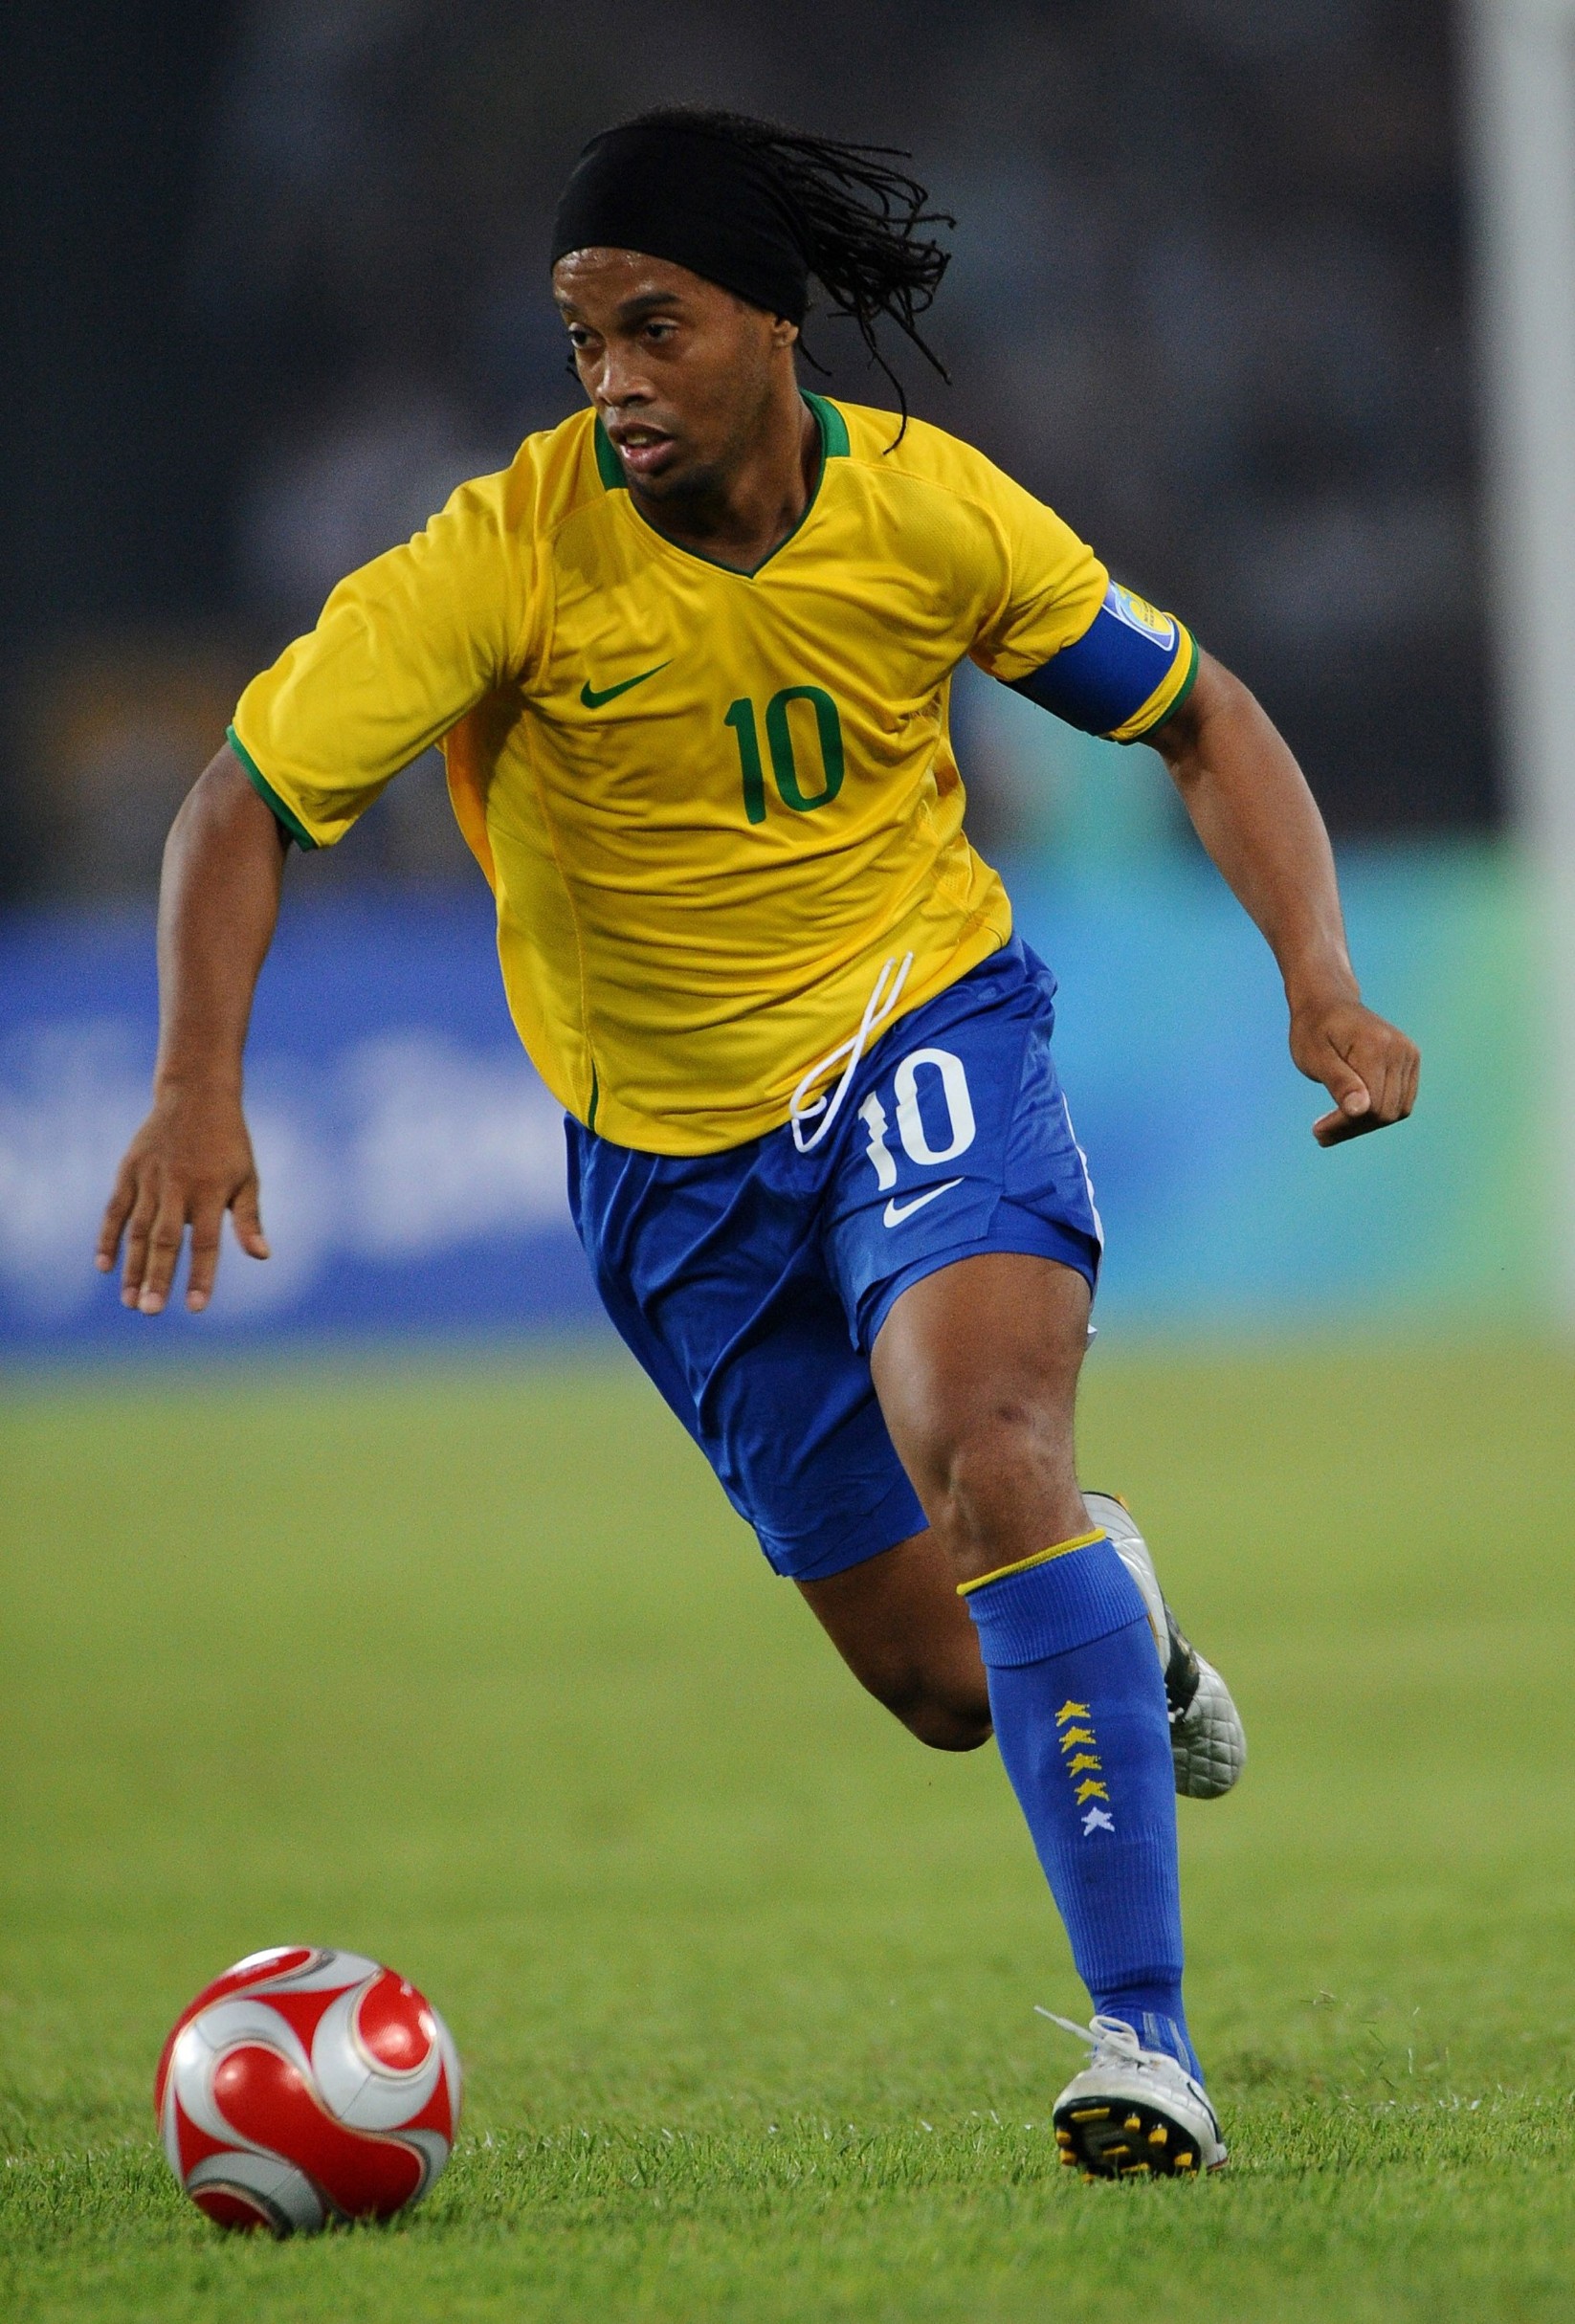 Aug. 19, 2008 - RonaldiNho of Brazil plays against Argentina in semifinals on Tuesday, August 19, 2008, in the Games of the the XXIX Olympiad in Beijing, China. (Abaca Press/MCT), Image: 212437328, License: Rights-managed, Restrictions: , Model Release: no, Credit line: Abaca Press / Zuma Press / Profimedia